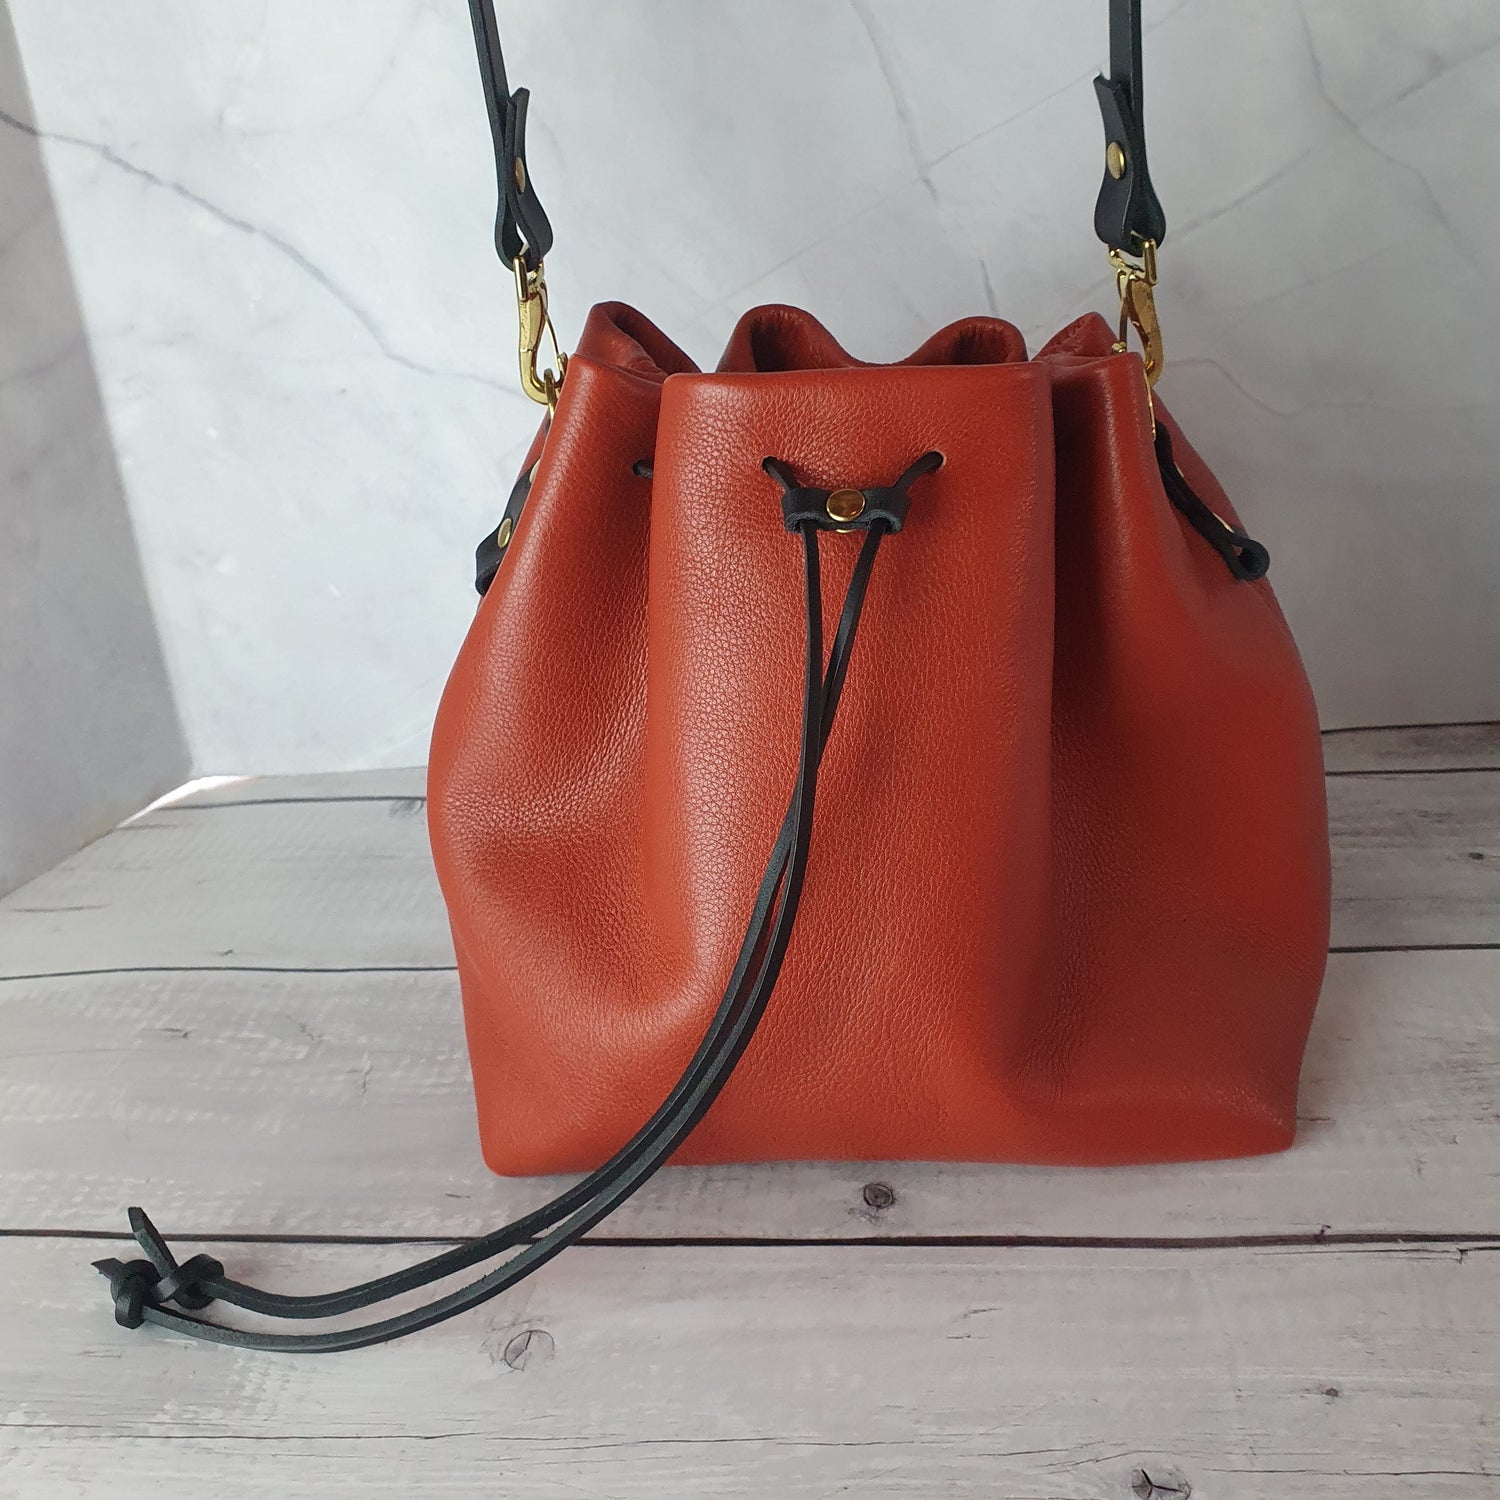 Hands of Tym Course 'Bag in a Day' Practical Leather Course Mini Bucket Bag